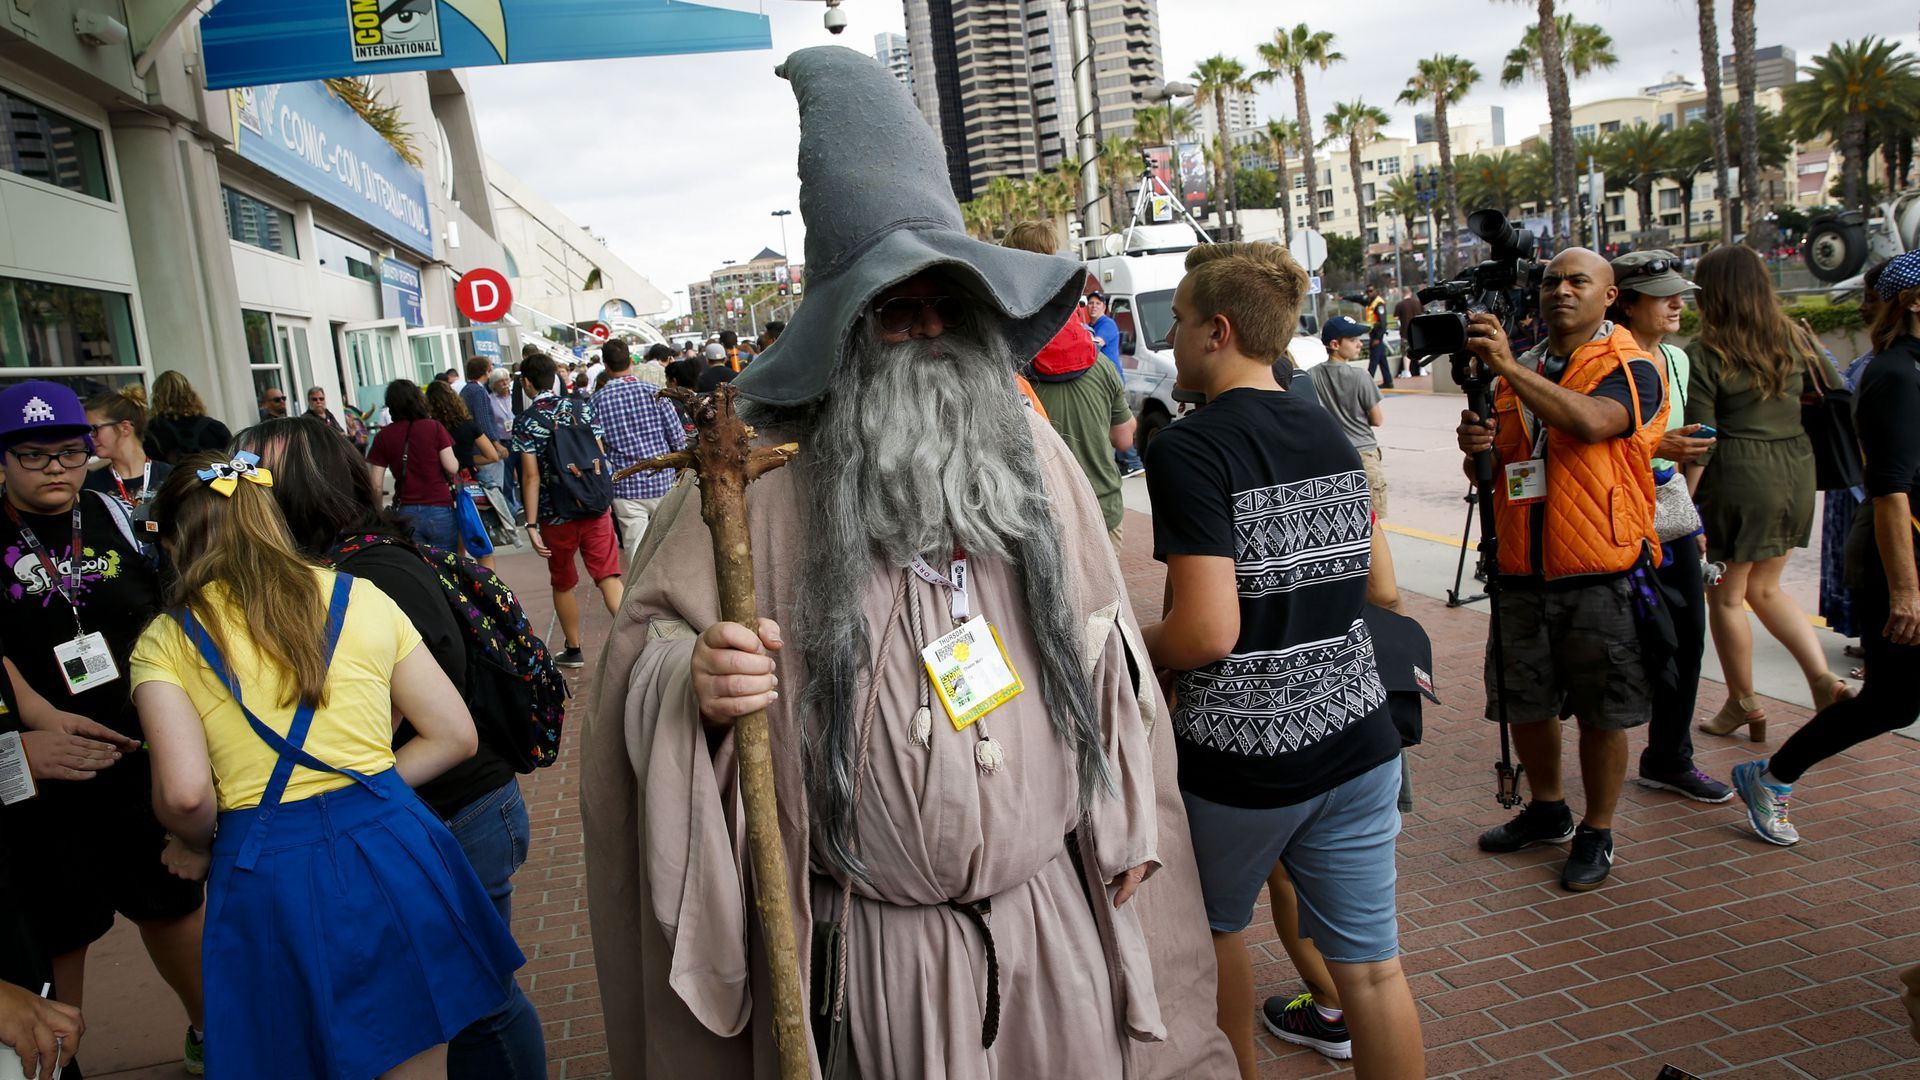 Photo of a person cosplaying as Gandalf from the Lord of the Rings